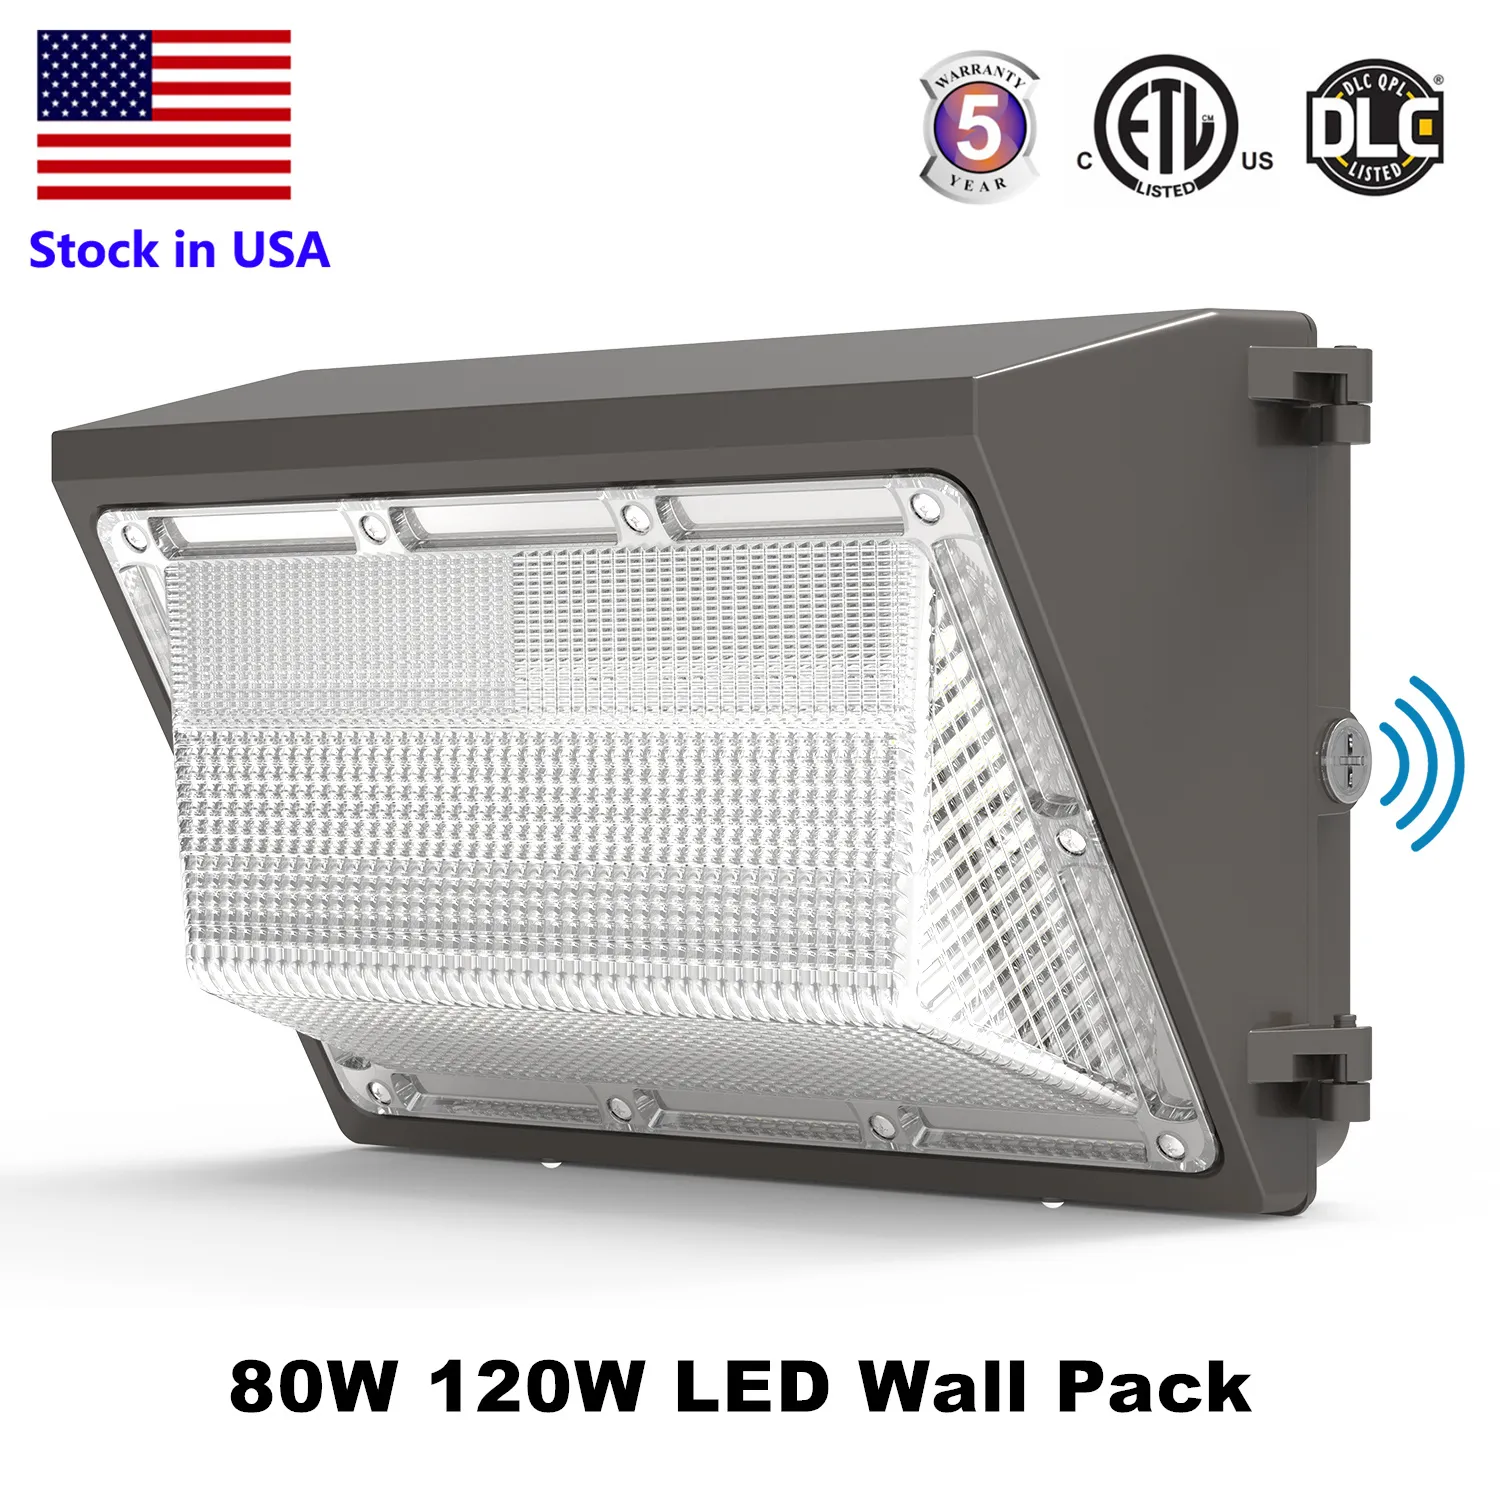 Outdoor LED WallPack Lamp 120W Dusk to Dawn Commercial Industrial Wall Fixture Lighting 5000K IP65